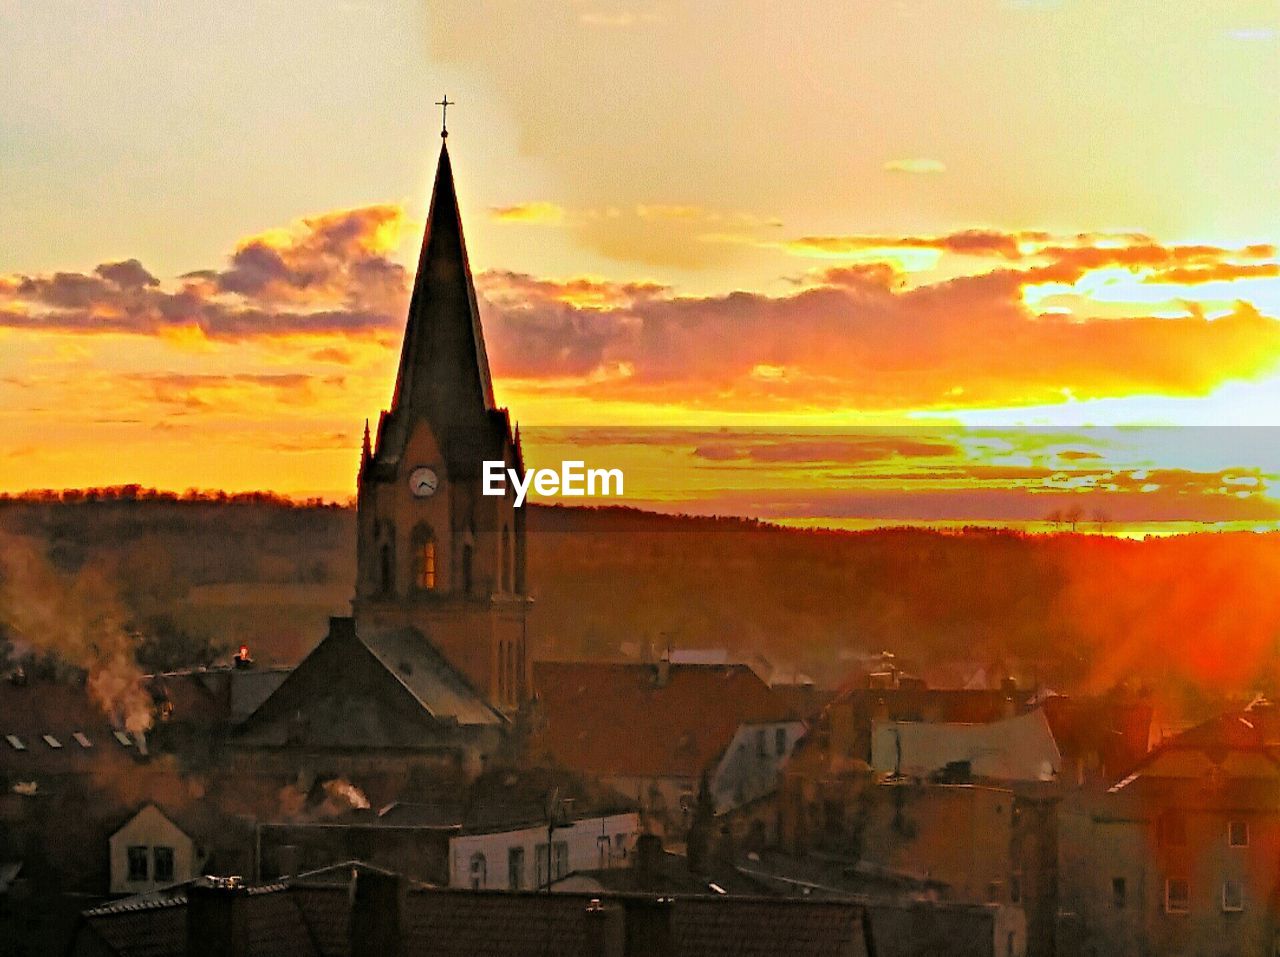 VIEW OF CHURCH AT SUNSET